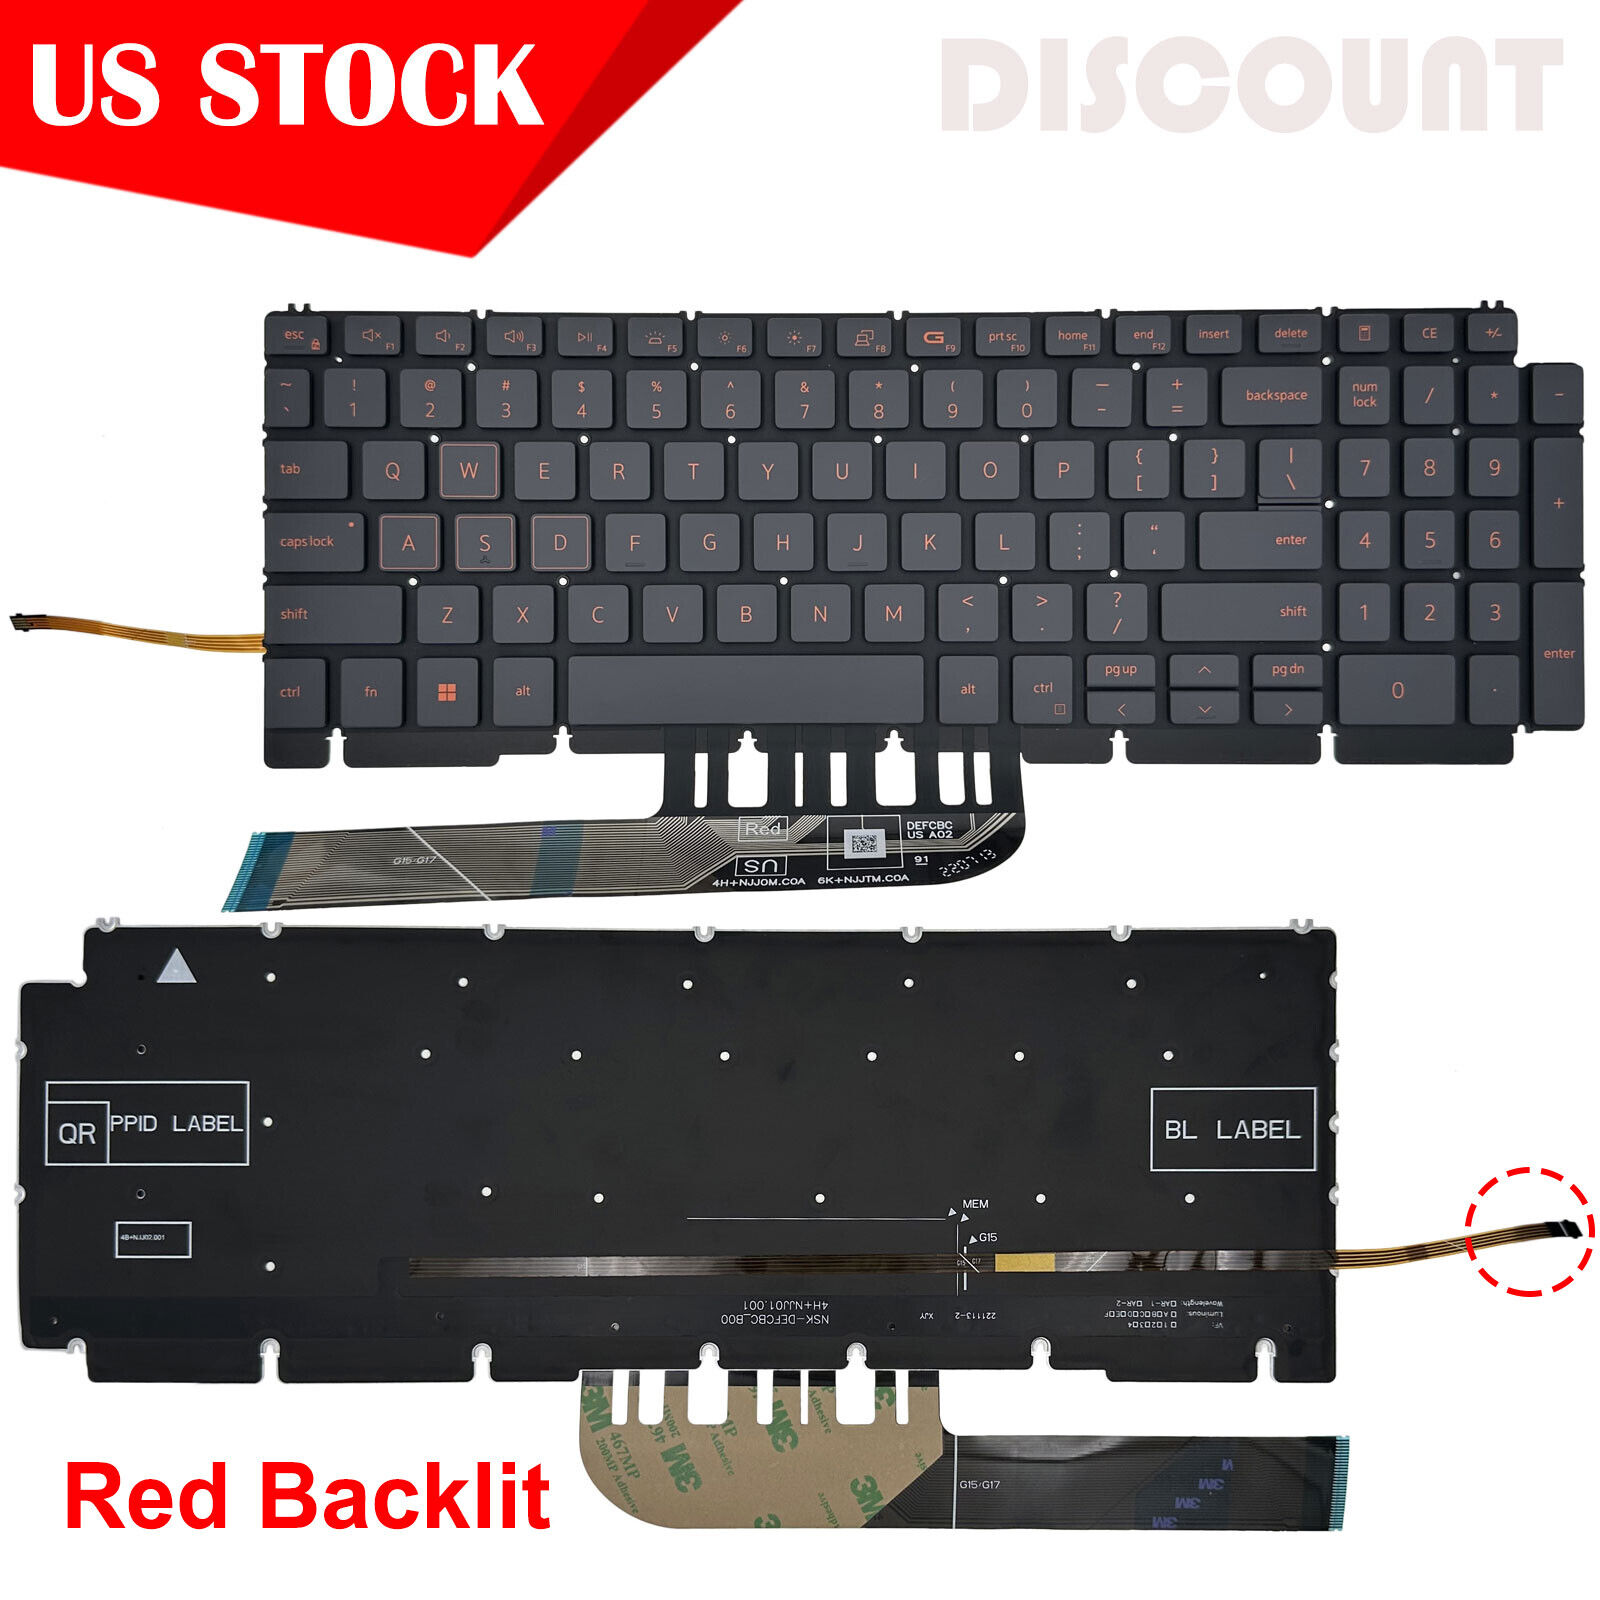 Replacement Keyboard Backlit US 0H4XRJ 343NN for Dell G15 (5510),G15 (5511) US